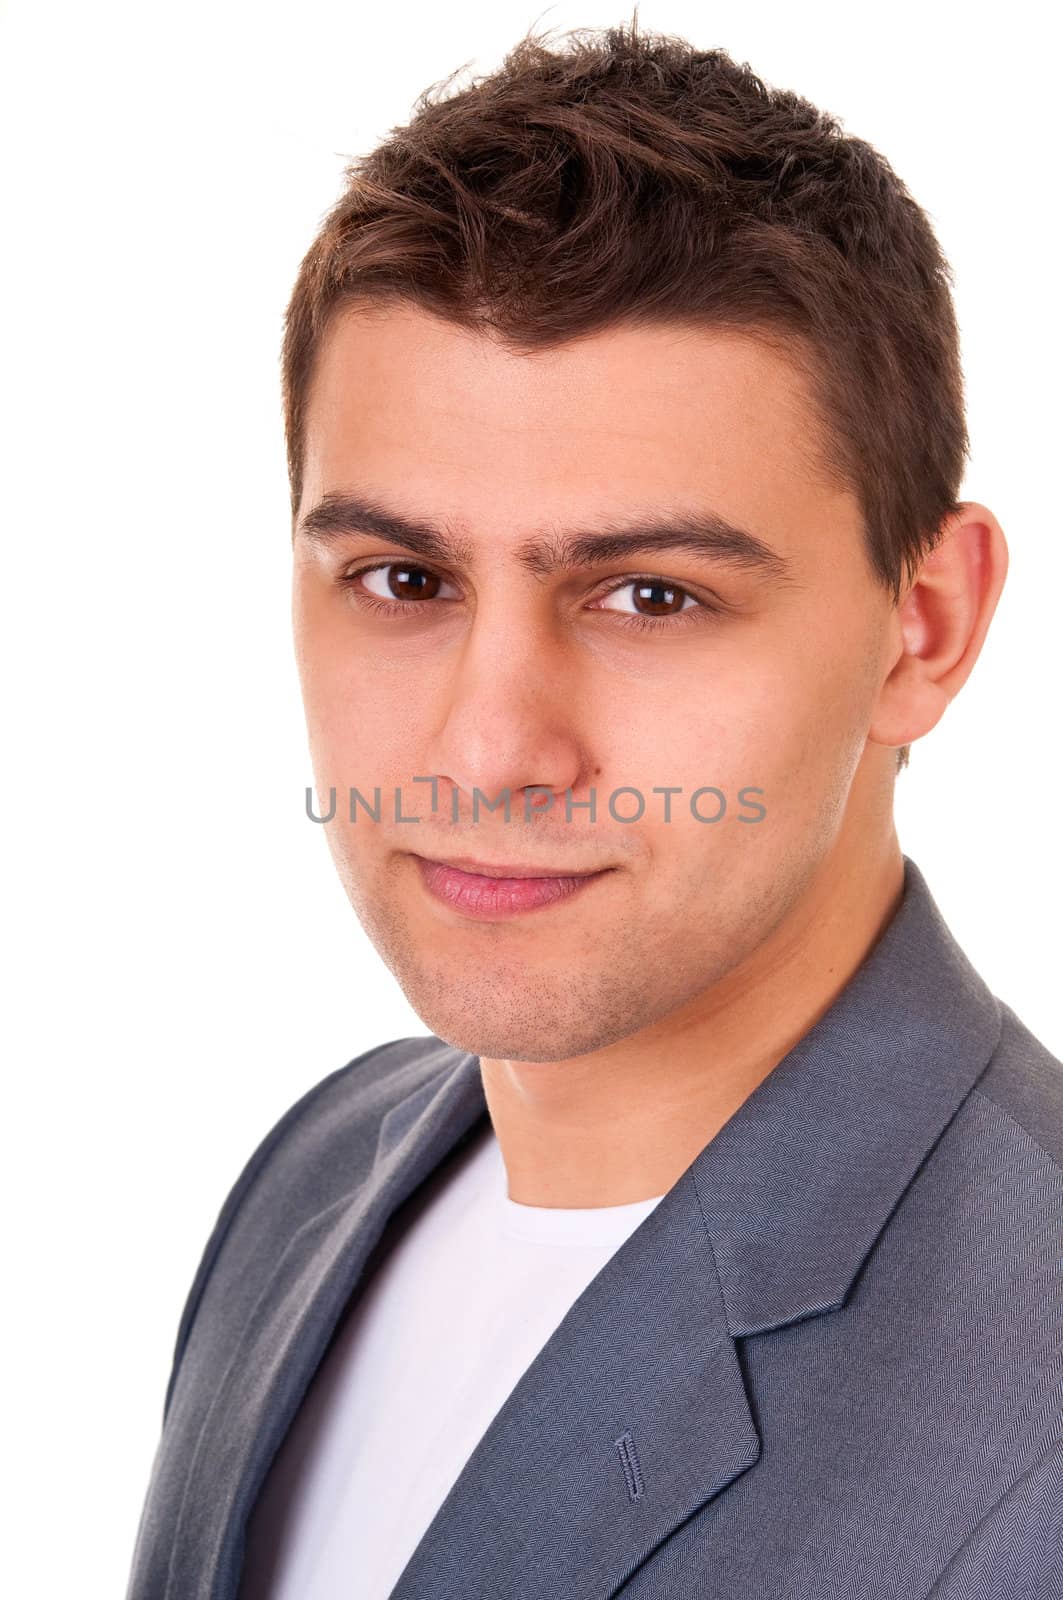 Casual caucasian man portrait isolated on white background